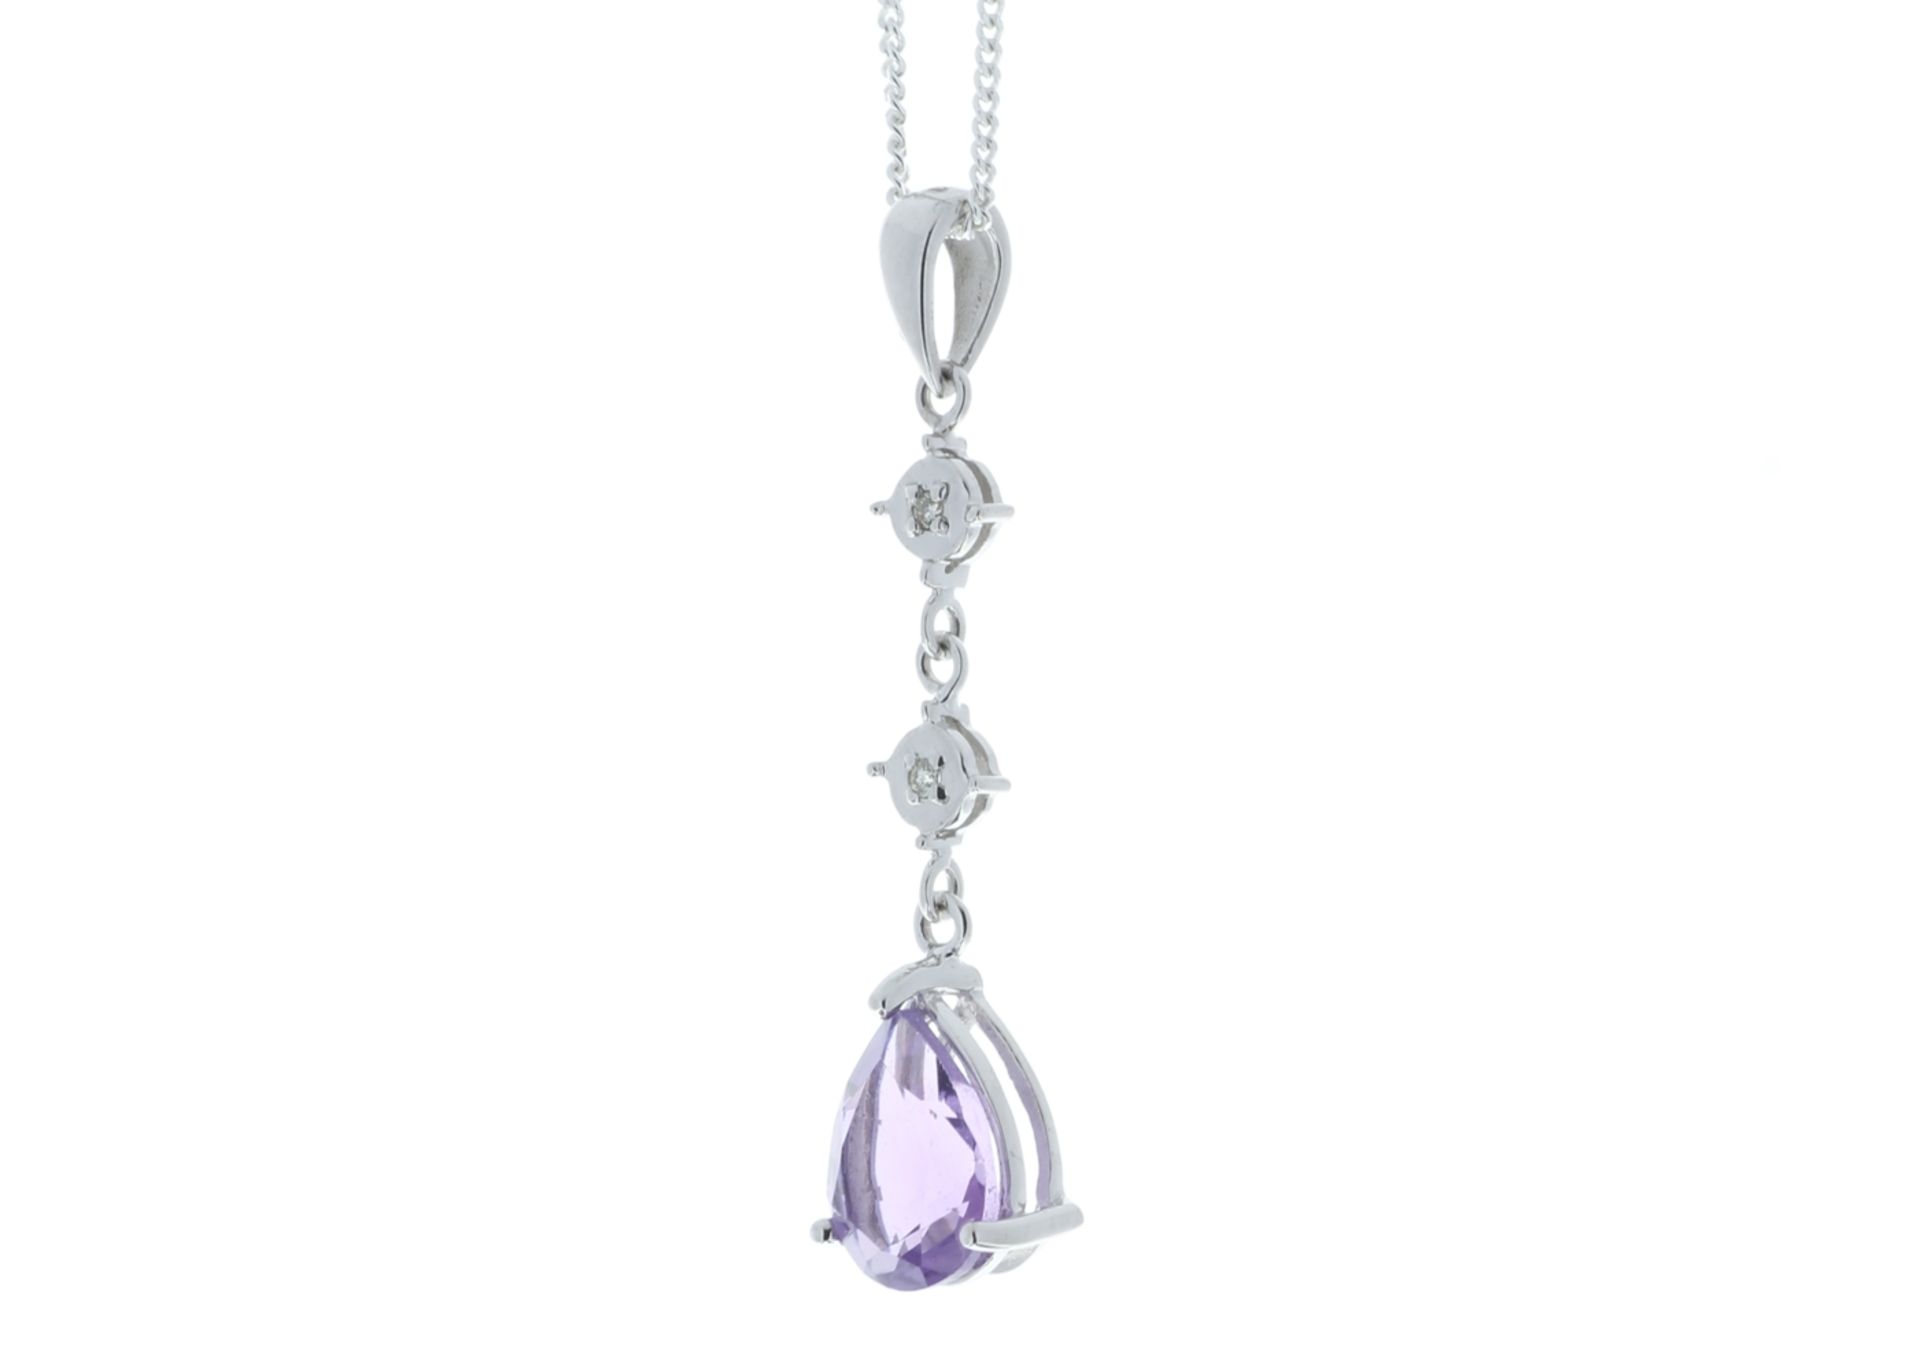 9ct White Gold Amethyst And Diamond Pendant 0.01 Carats - Valued by GIE £560.00 - This is classic - Image 4 of 5